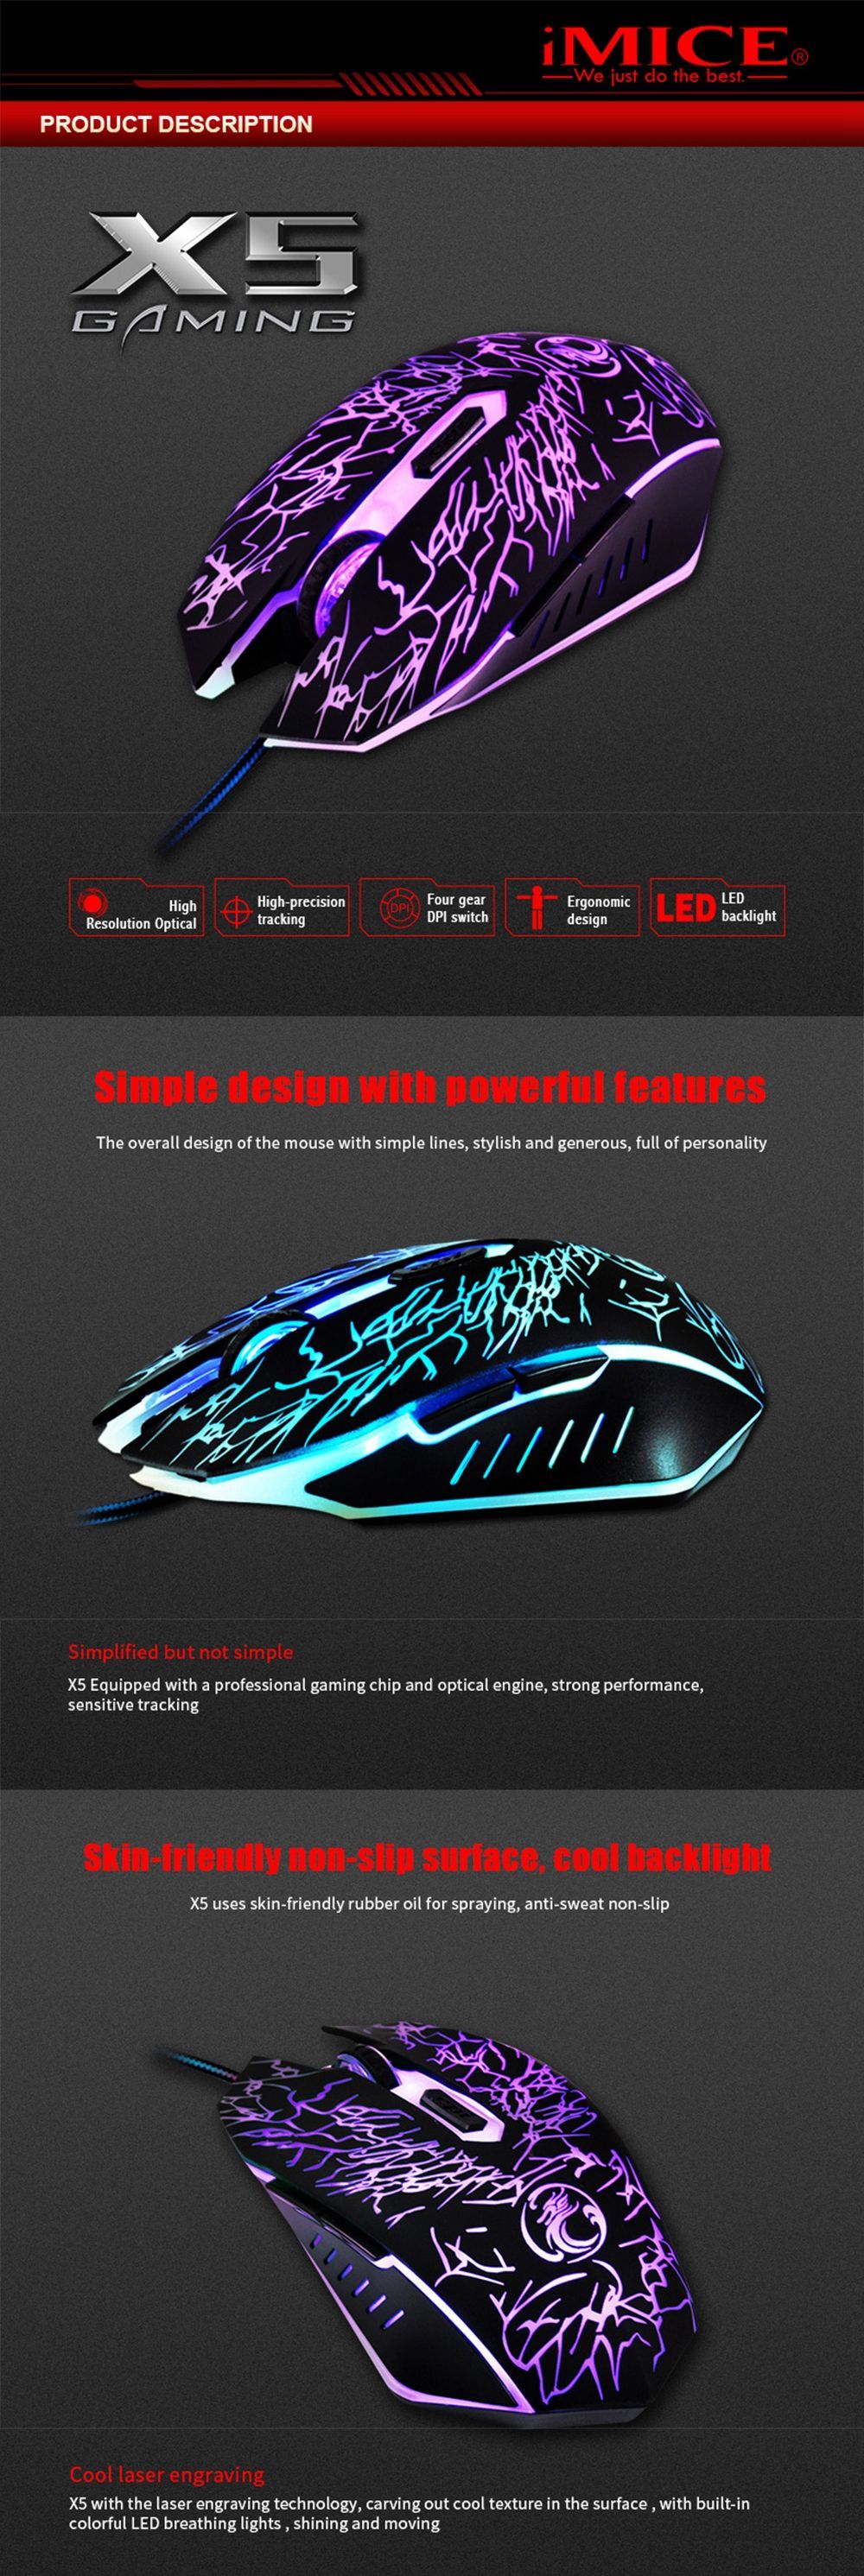 IMICE-X5-6-Buttons-7-Colorful-LED-Breathing-Light-Optical-USB-Wired-Gaming-Mouse-for-PC-1576774